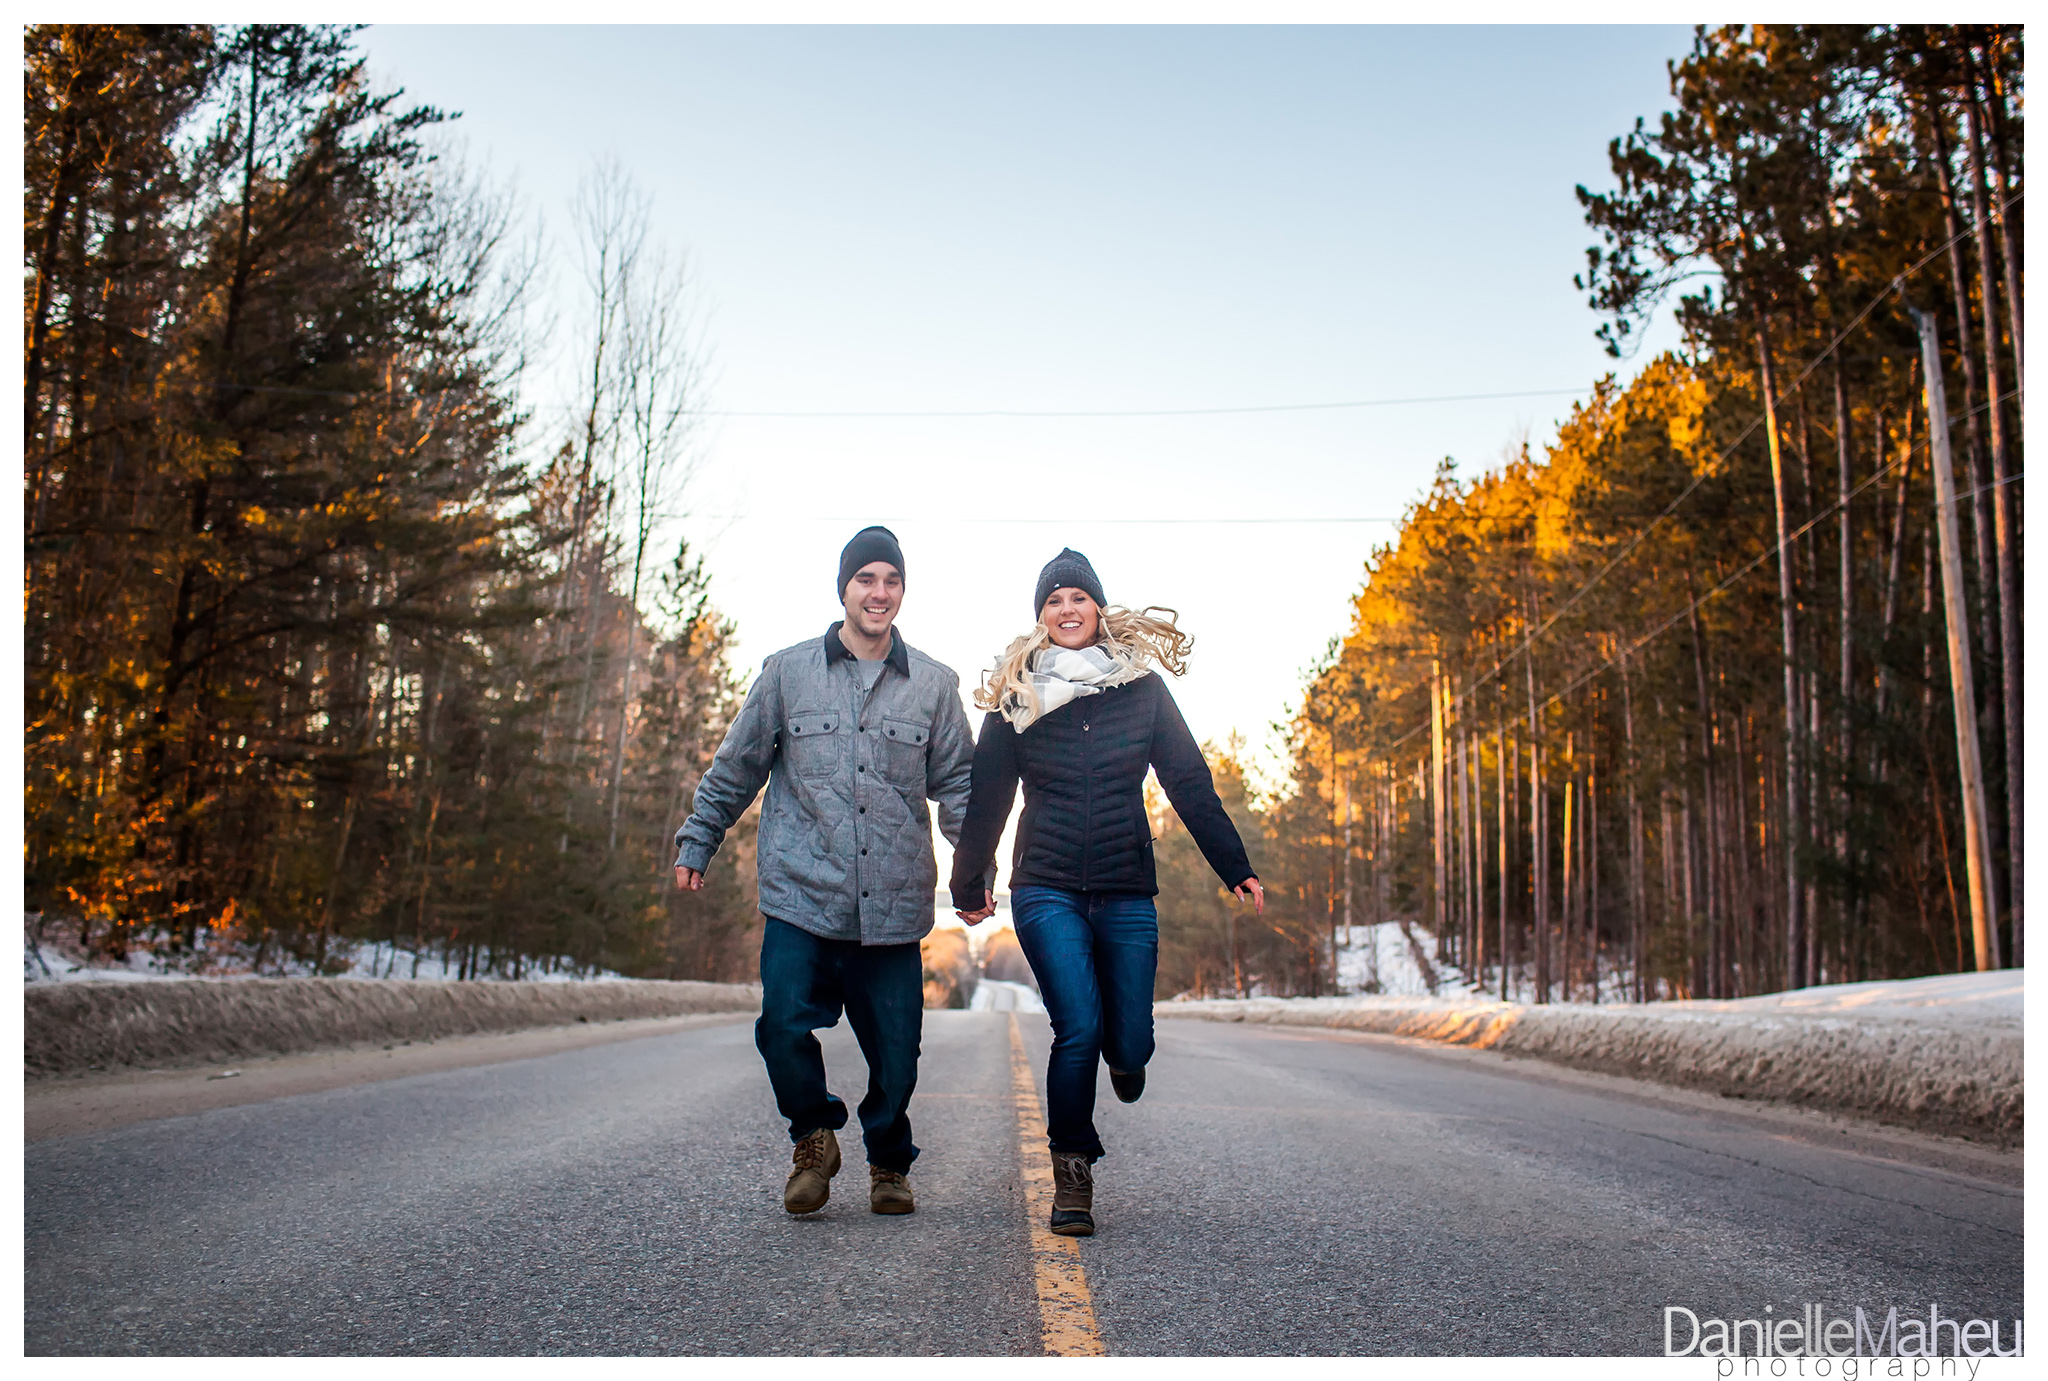 Engage couple in winter run down county road holding hands